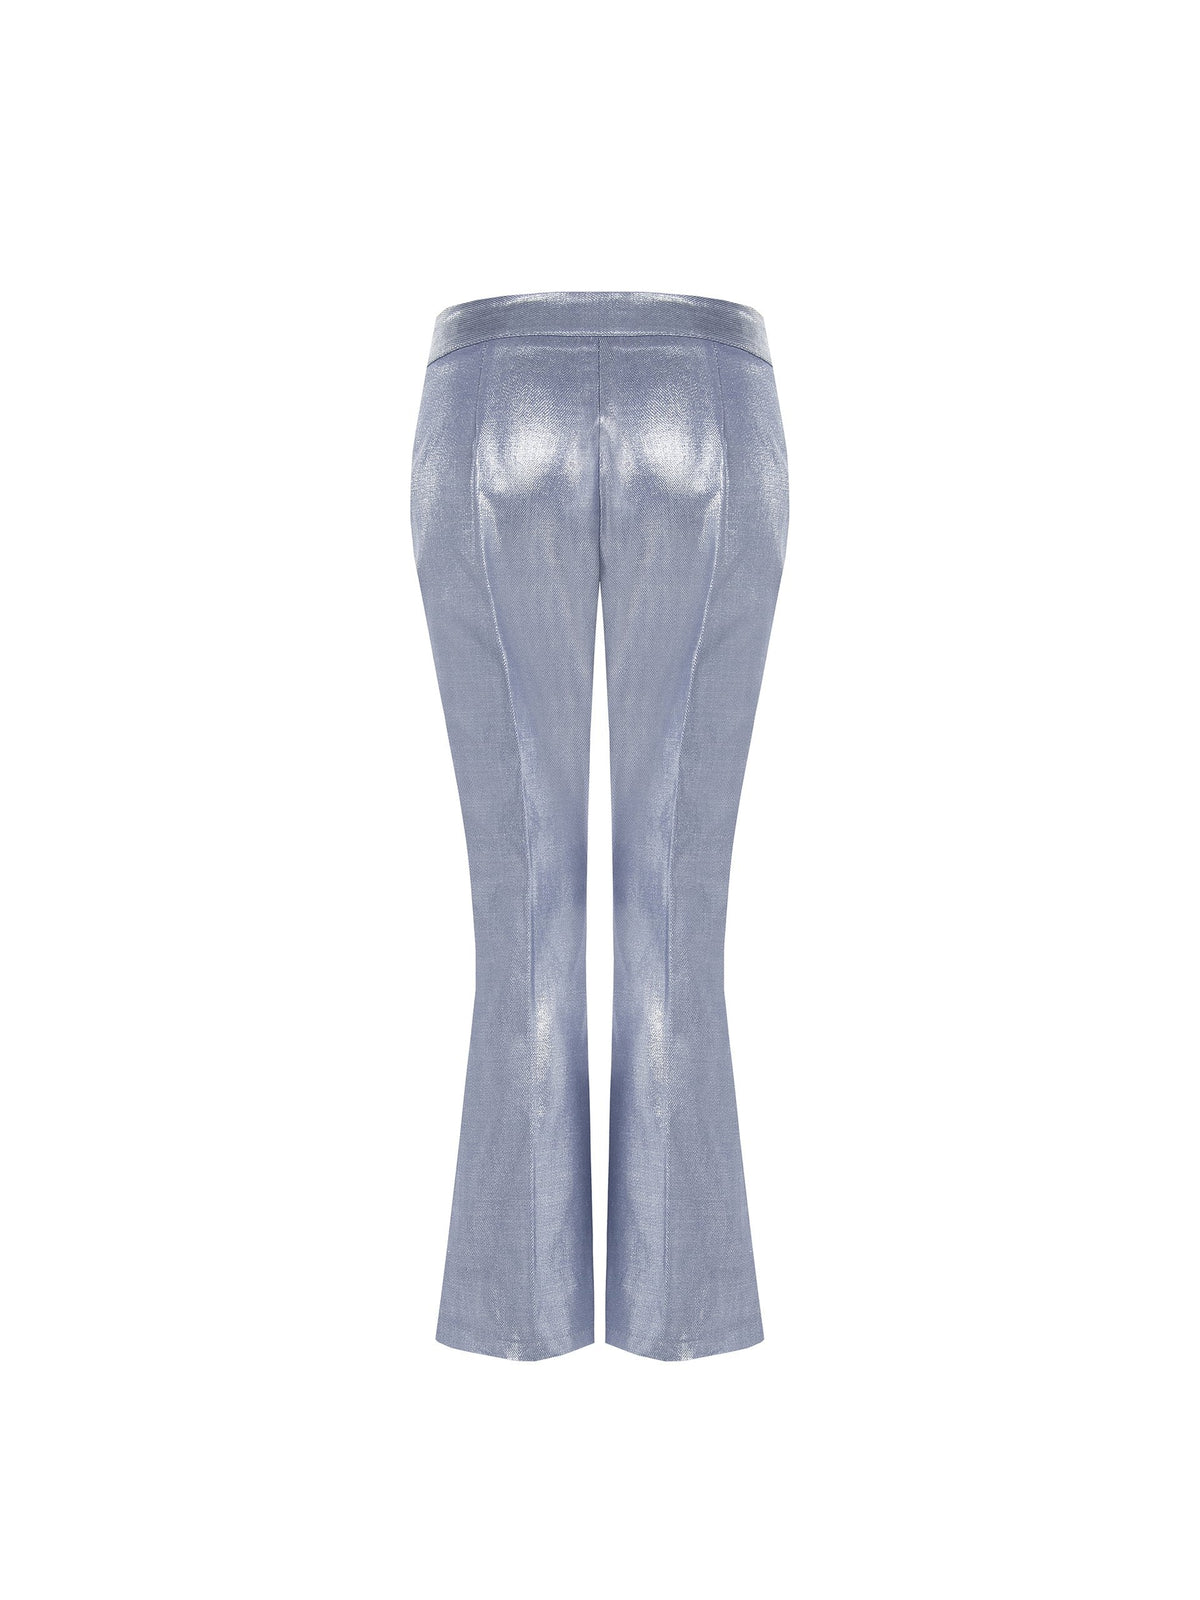 Flared Trousers in Laminated Denim